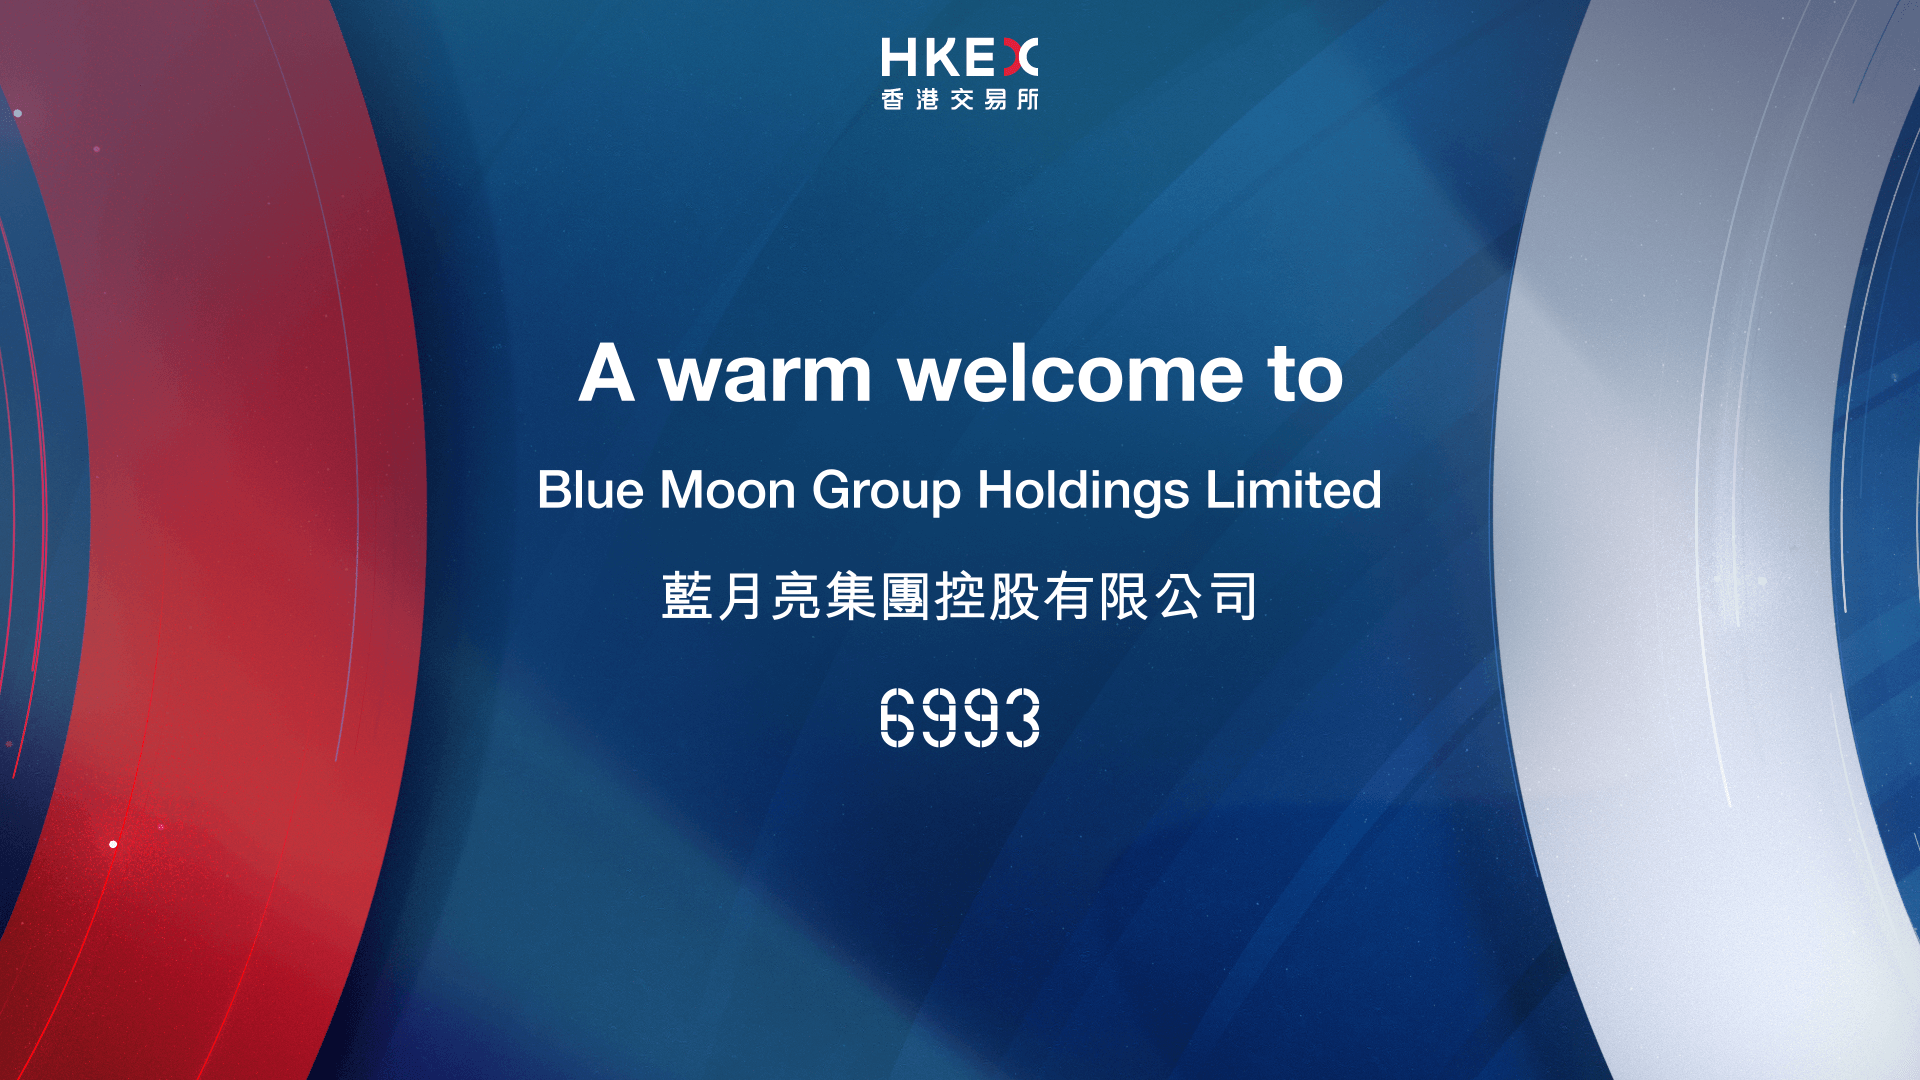 Blue Moon Group Holdings Limited Hkex Virtual Listing Ceremony